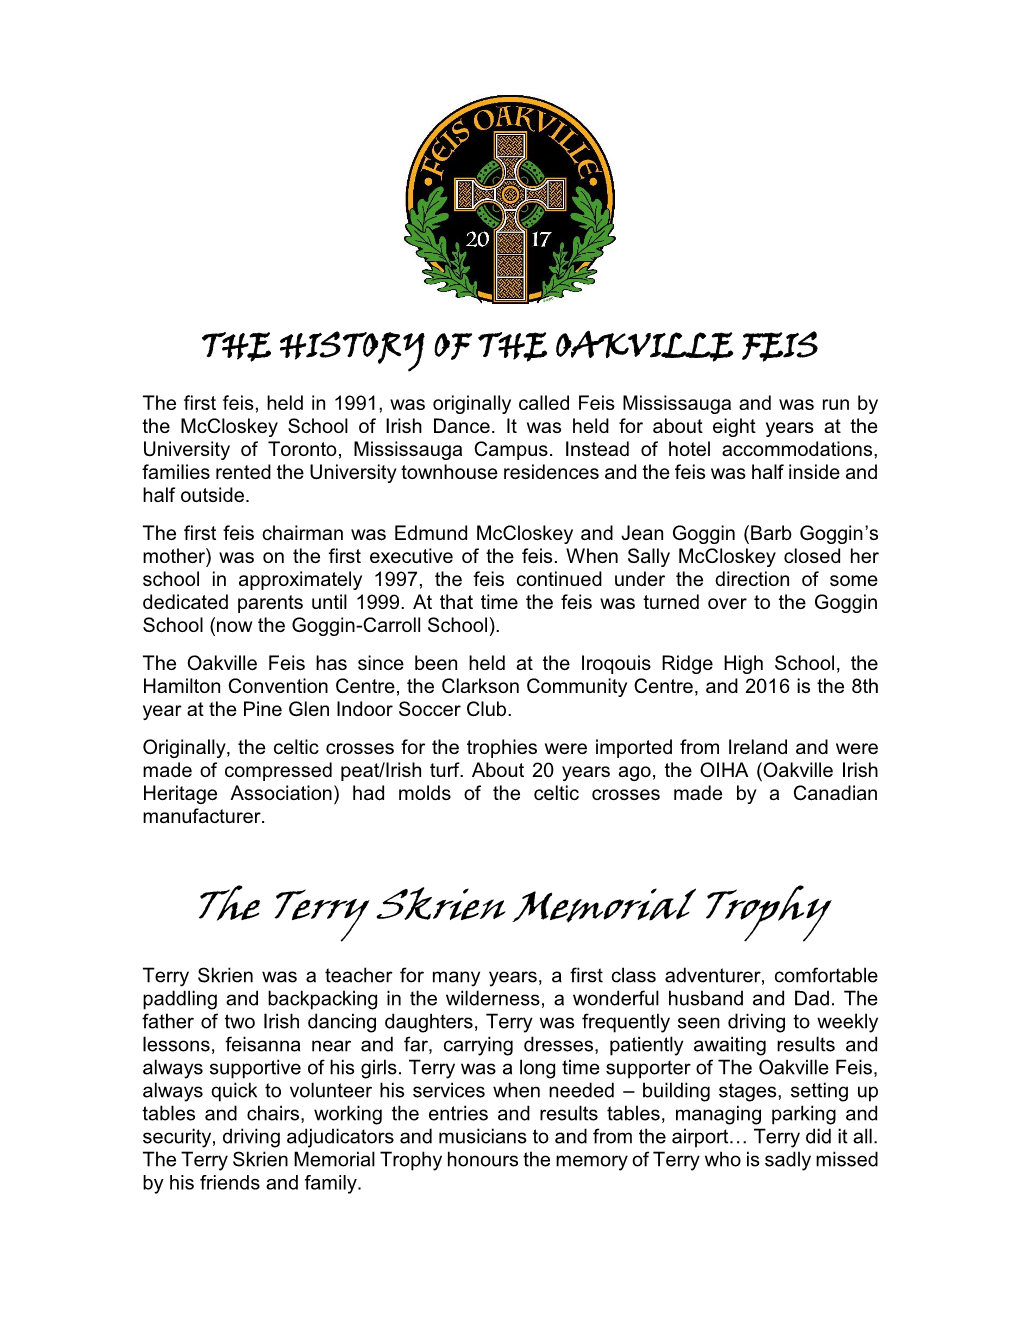 THE HISTORY of the OAKVILLE FEIS the First Feis, Held in 1991, Was Originally Called Feis Mississauga and Was Run by the Mccloskey School of Irish Dance